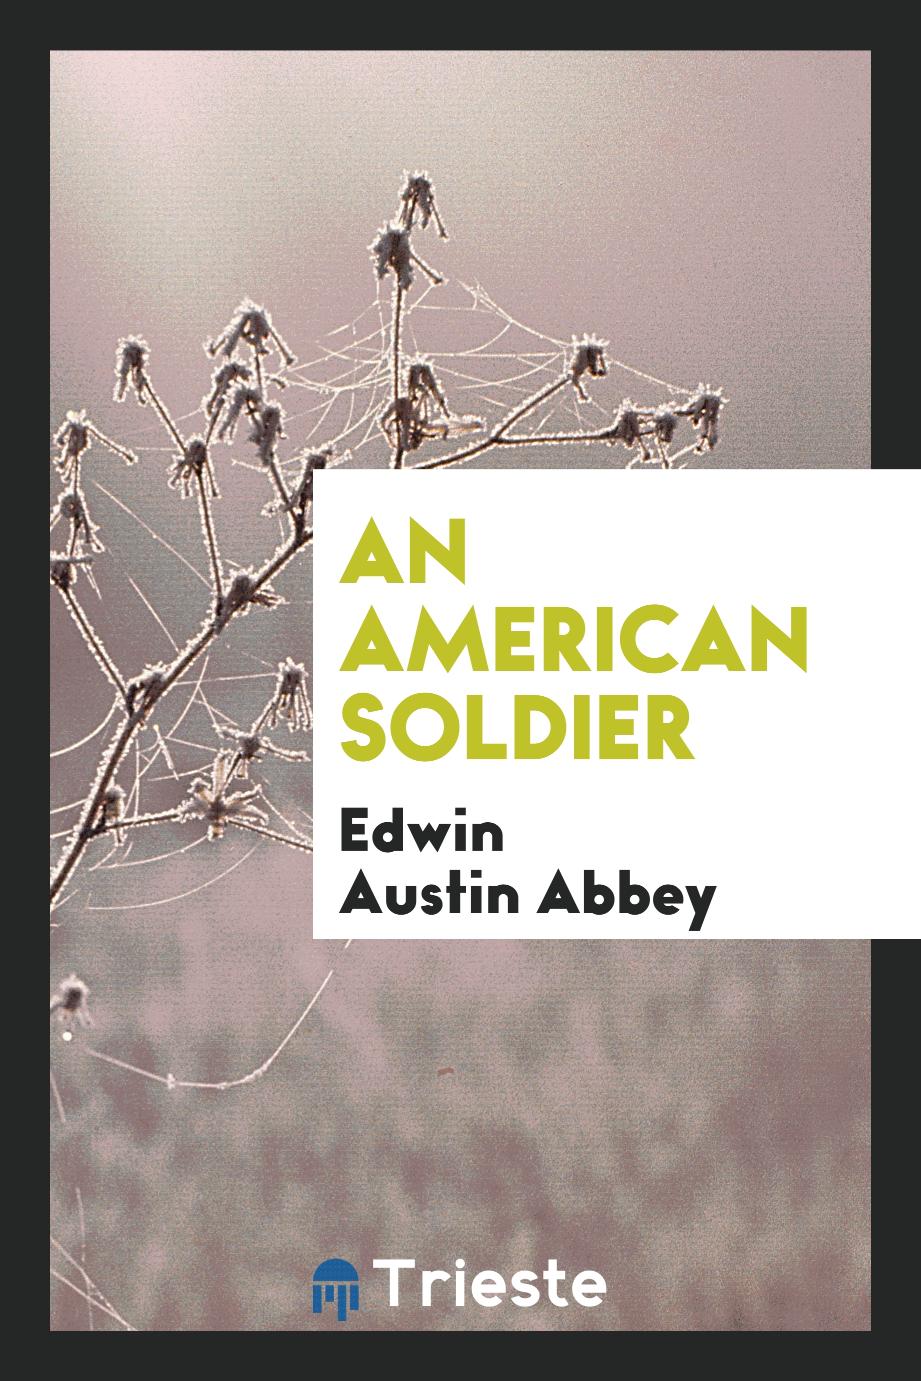 An American soldier